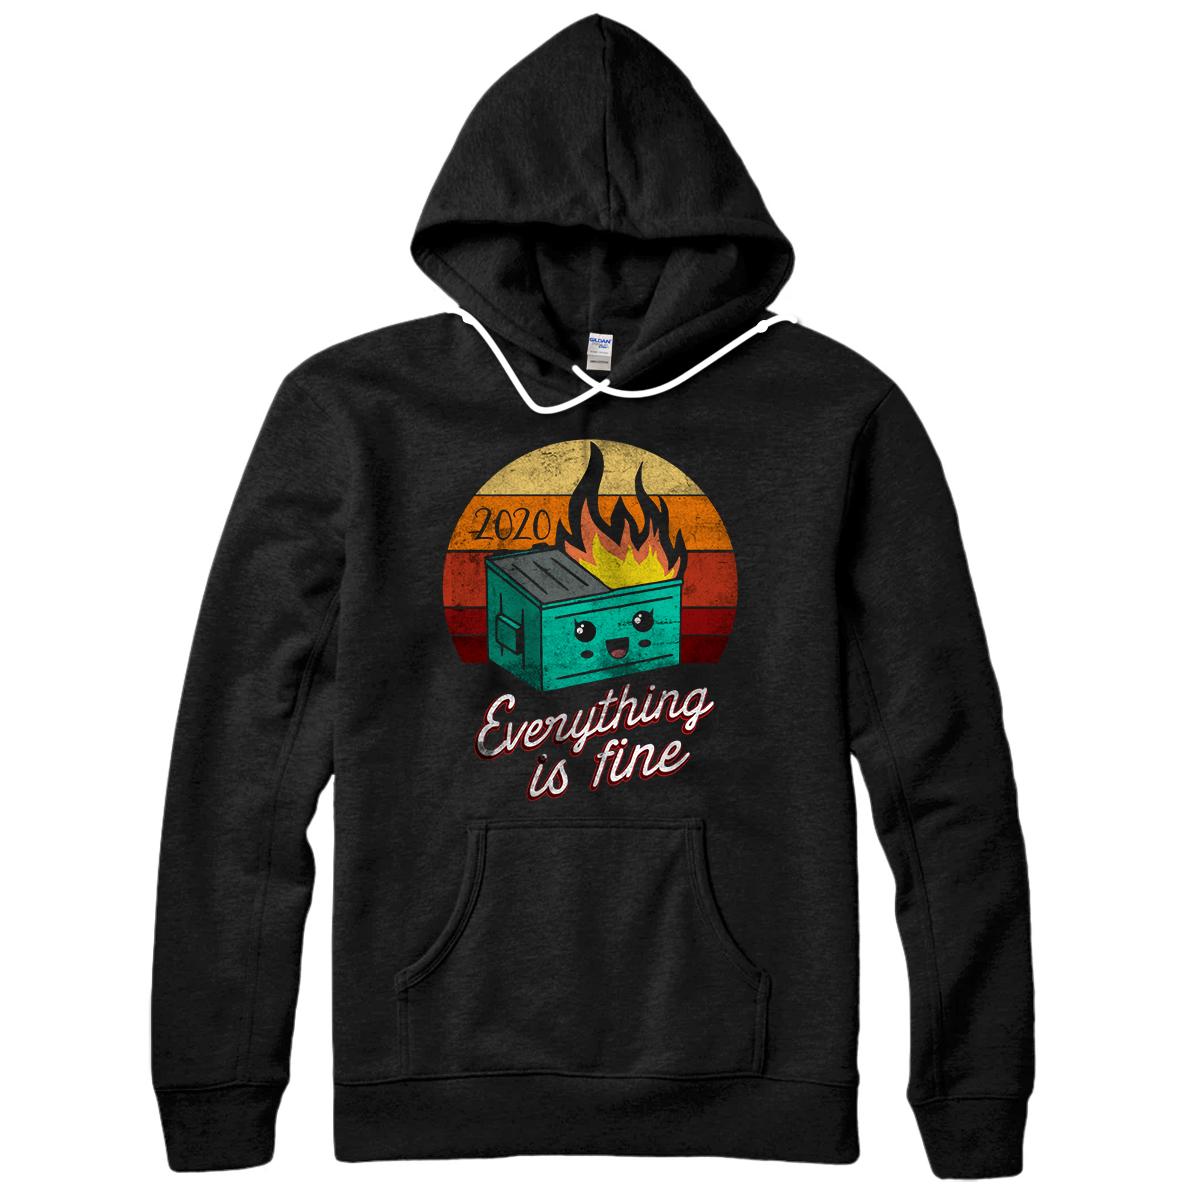 Personalized 2020 Dumpster Fire Retro Sunset funny Pullover Hoodie